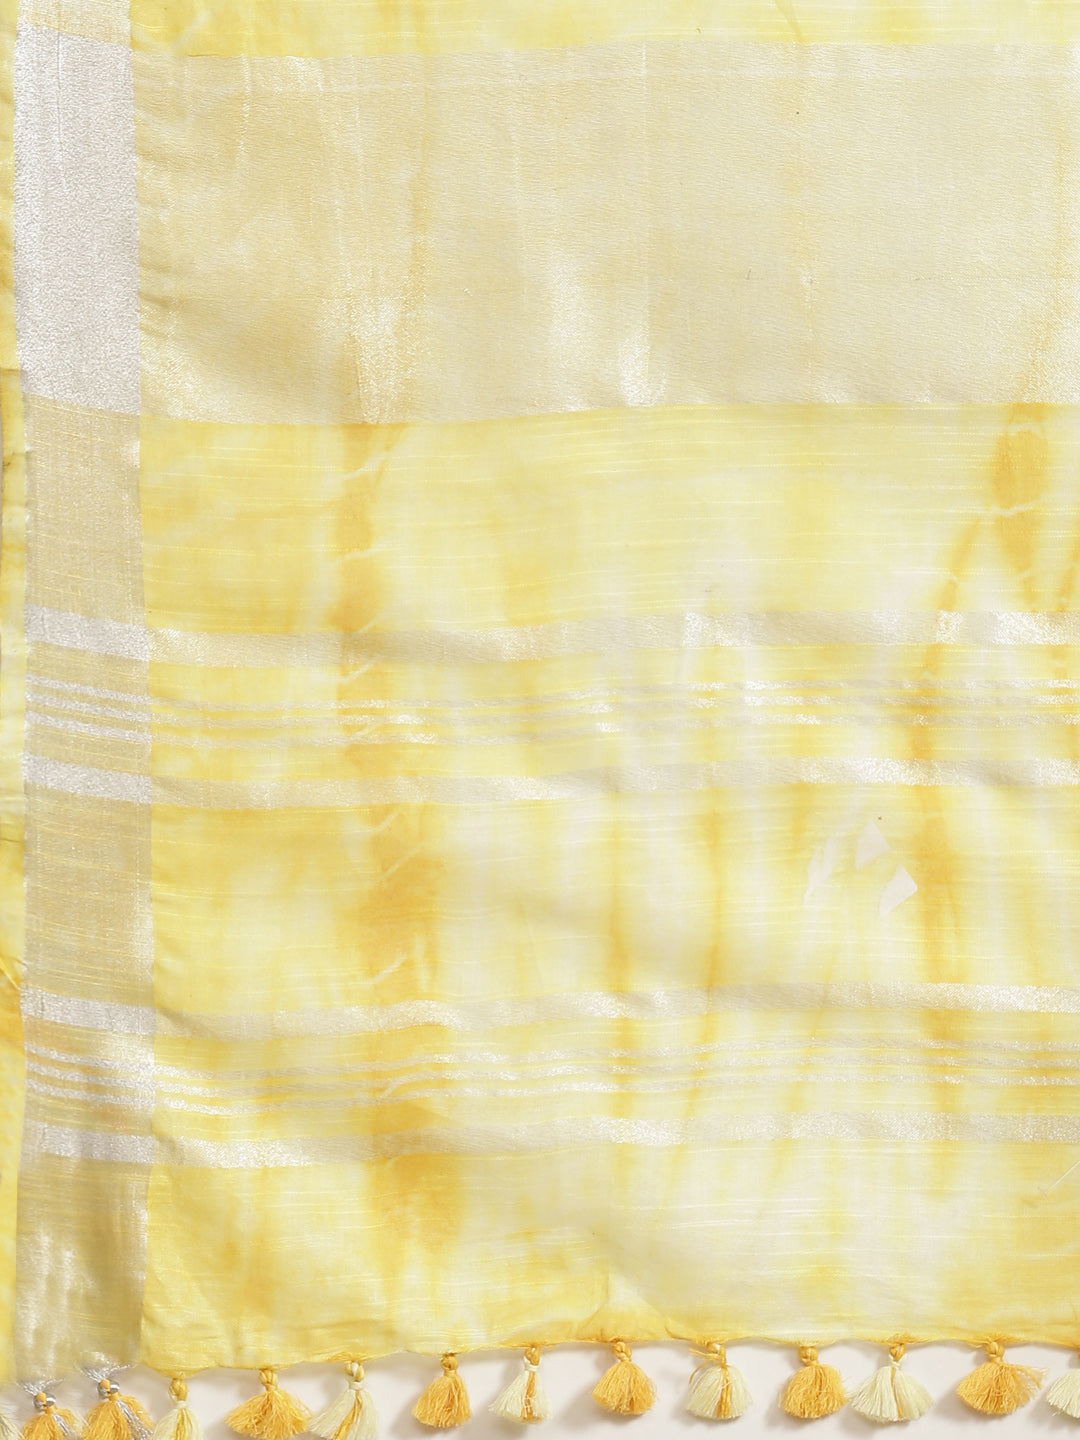 Yellow and White, Kalakari India Linen Woven Saree and Blouse ALBGSA0079-Saree-Kalakari India-ALBGSA0079-Cotton, Geographical Indication, Hand Crafted, Heritage Prints, Linen, Natural Dyes, Red, Sarees, Shibori, Sustainable Fabrics, Woven, Yellow-[Linen,Ethnic,wear,Fashionista,Handloom,Handicraft,Indigo,blockprint,block,print,Cotton,Chanderi,Blue, latest,classy,party,bollywood,trendy,summer,style,traditional,formal,elegant,unique,style,hand,block,print, dabu,booti,gift,present,glamorous,affordab